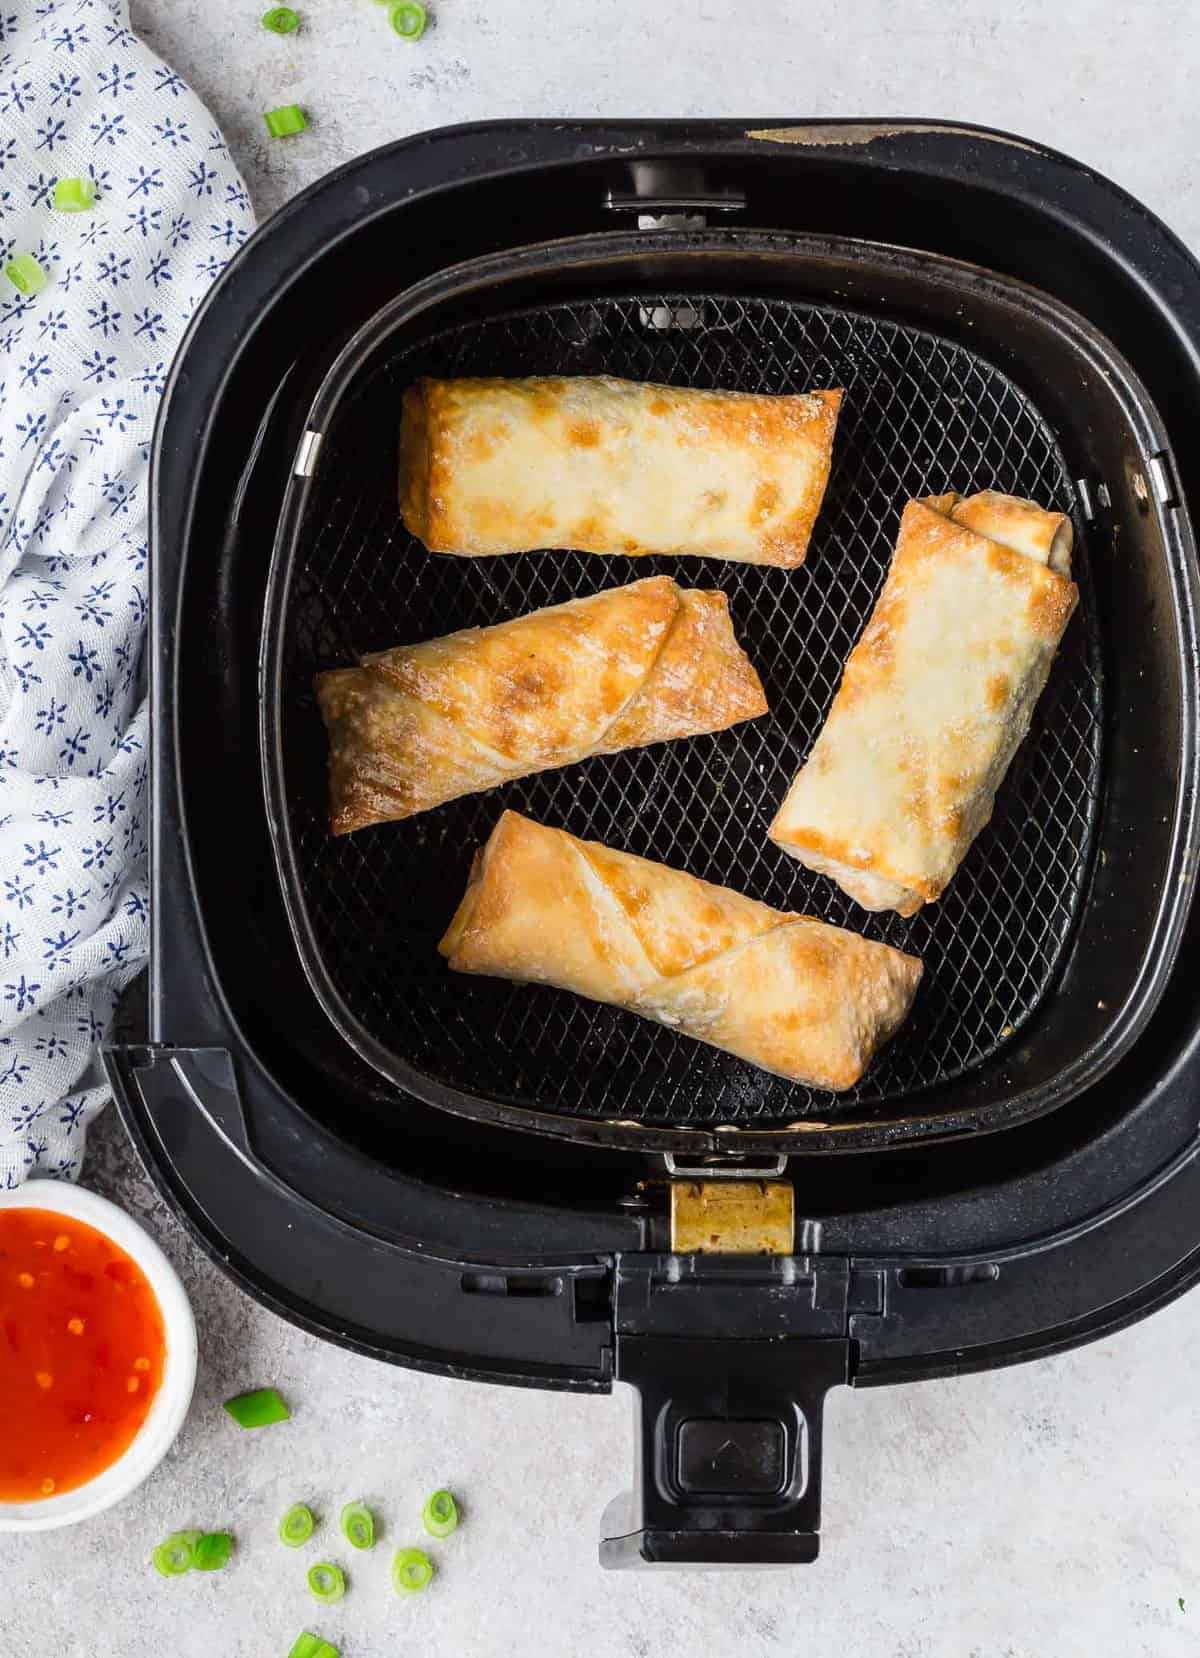 Overhead view of a air fryer basket with egg rolls in it.